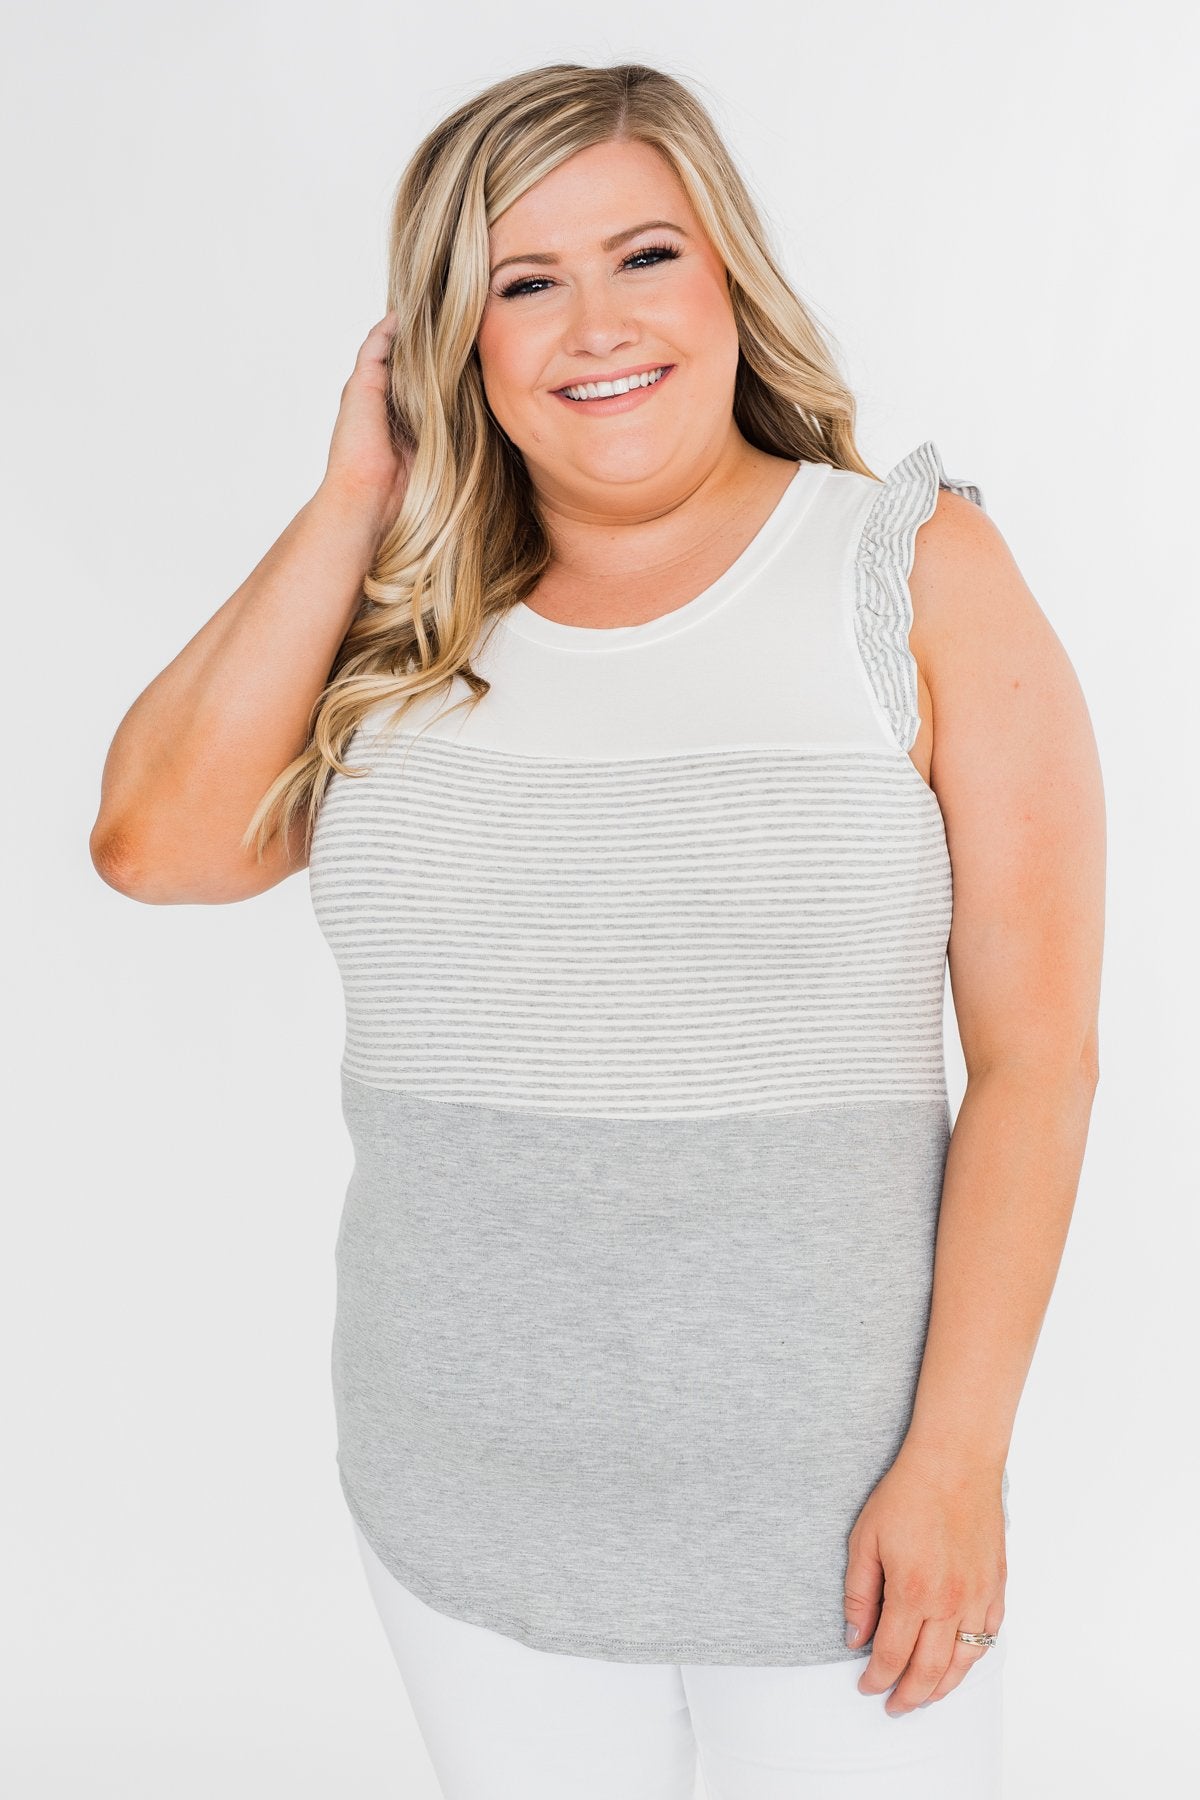 The Sweetest Thing Color Block Tank Top- Grey